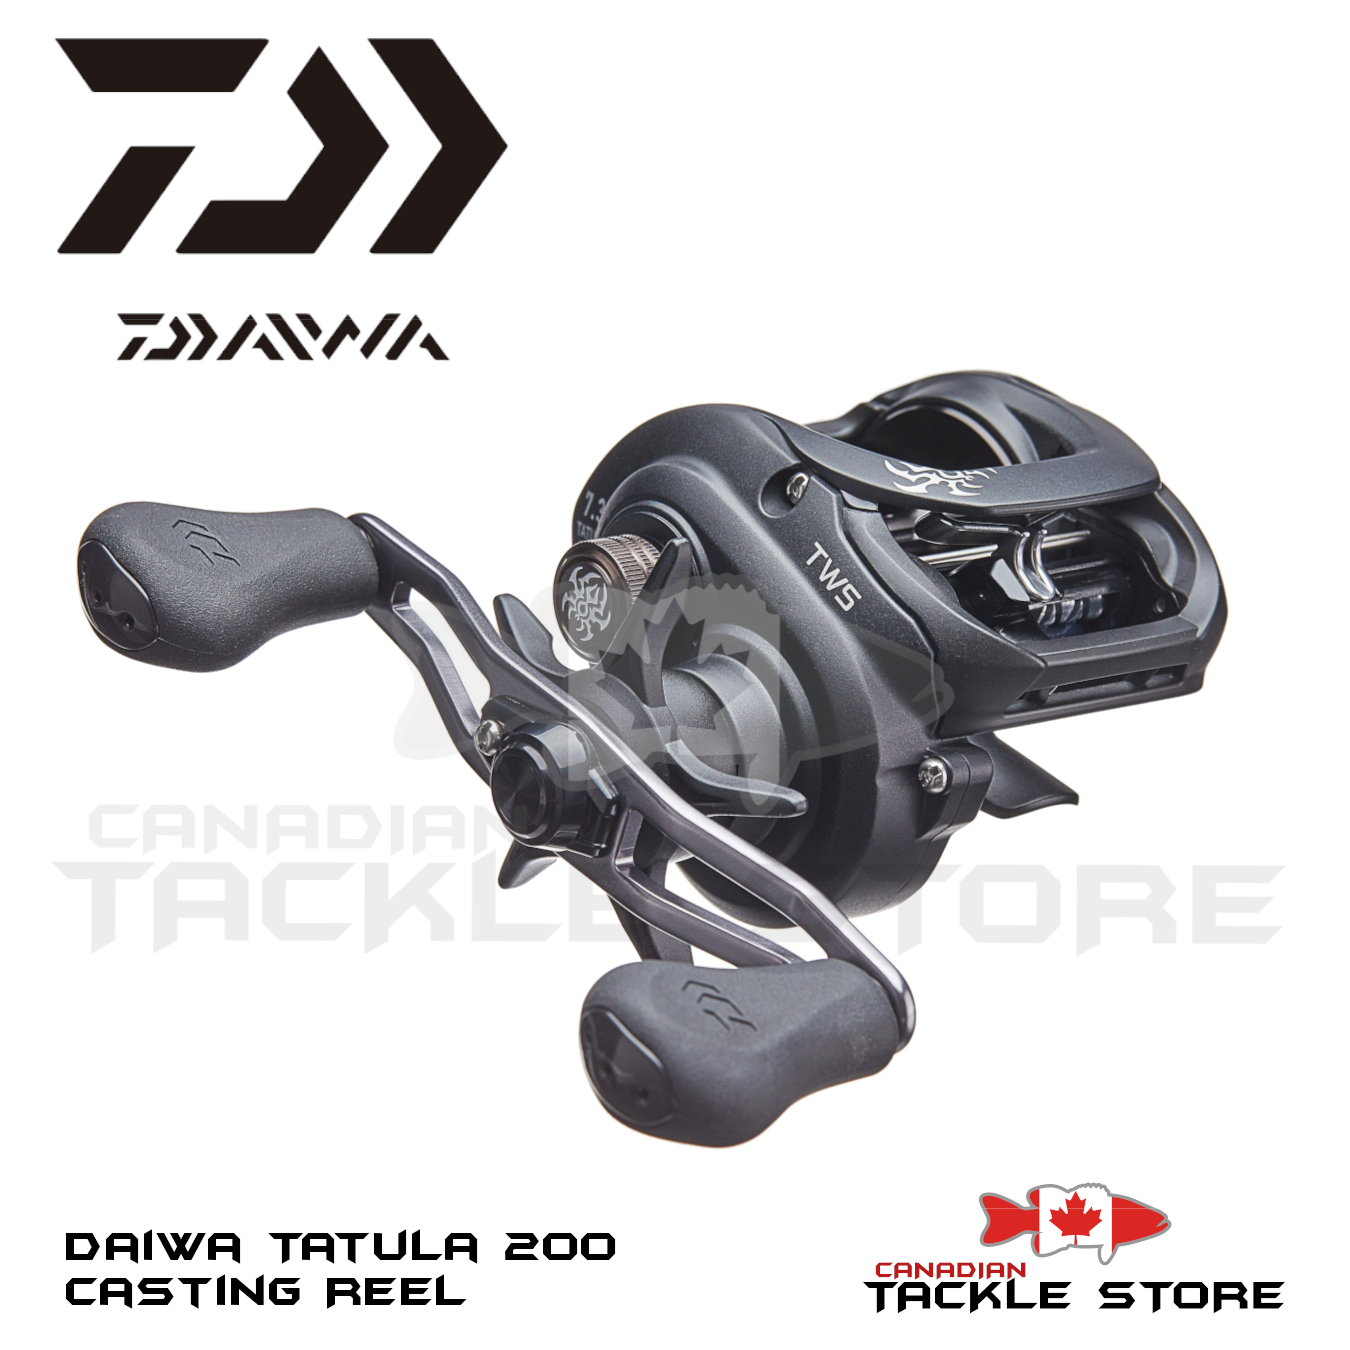 Daiwa AG1305X -- Service and Lubrication -- Young Martin's Reels